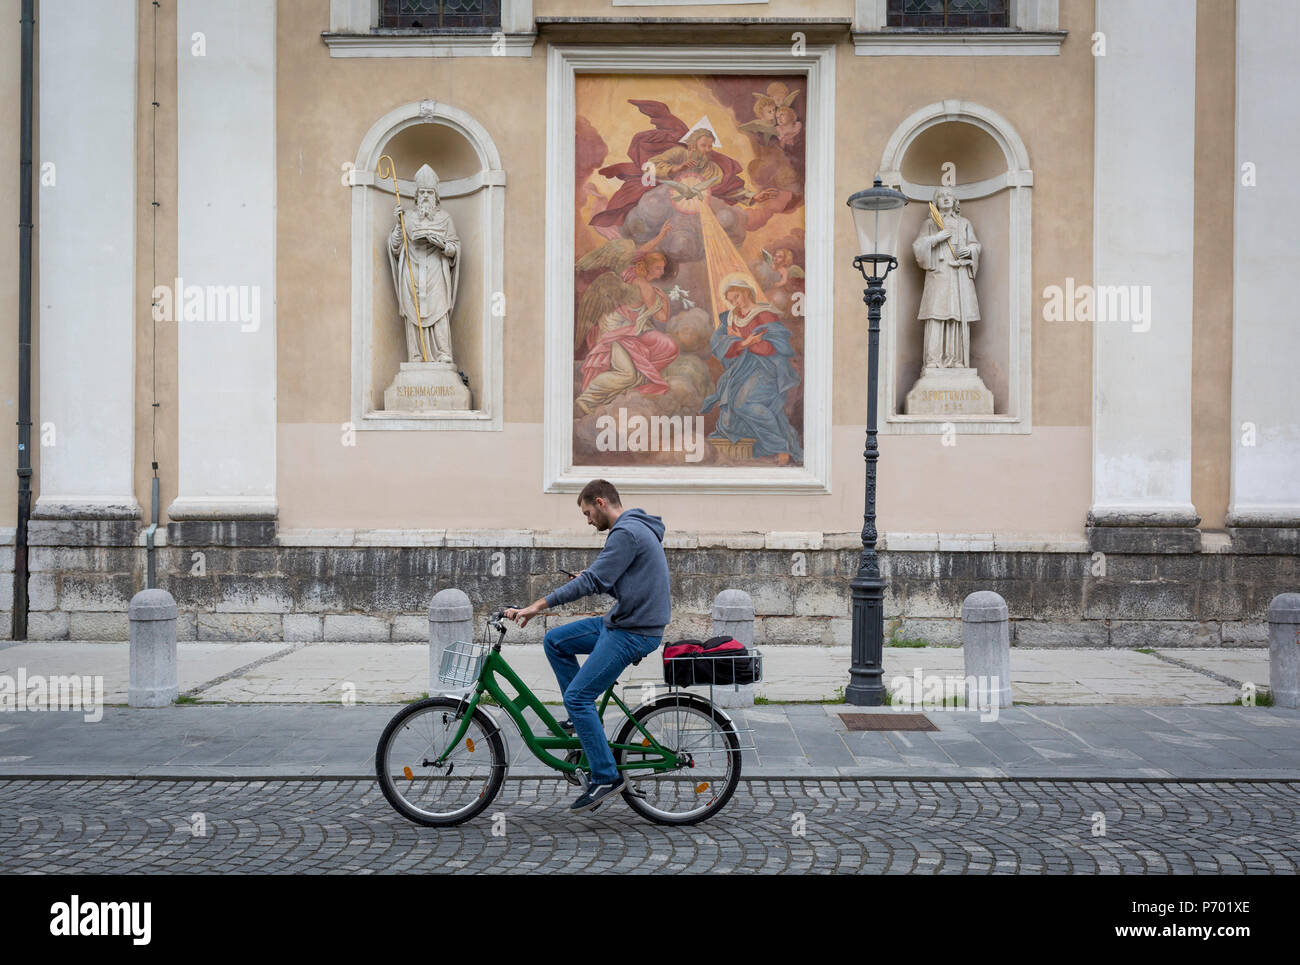 While checking his phone, a cyclist rides past a mural and sculpture outside Cathedral of saint Nicholas in the Slovenian capital, Ljubljana, on 28th June 2018, in Ljubljana, Slovenia. Ljubljana is a small city with flat terrain and a good cycling infrastructure. It was featured at eighth on the 'Copenhagenize' index listing the most bike-friendly cities in the world though bike theft is prevalent. Stock Photo